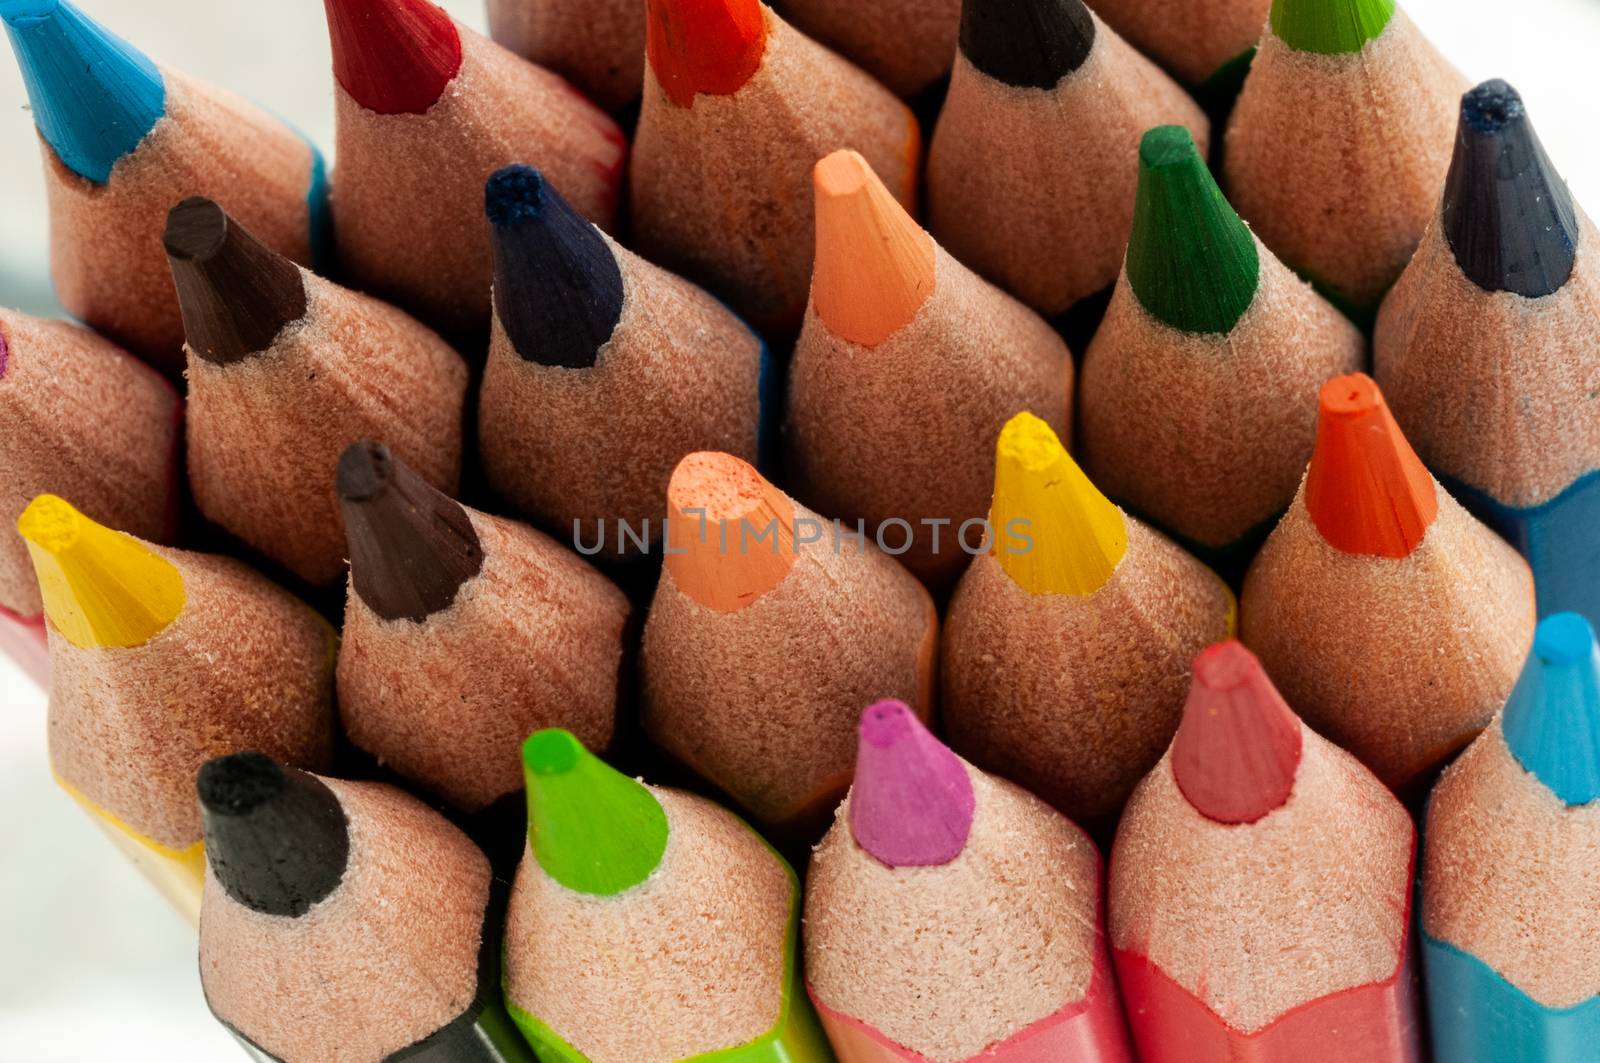 macro view of a group of colored pencils by Haspion